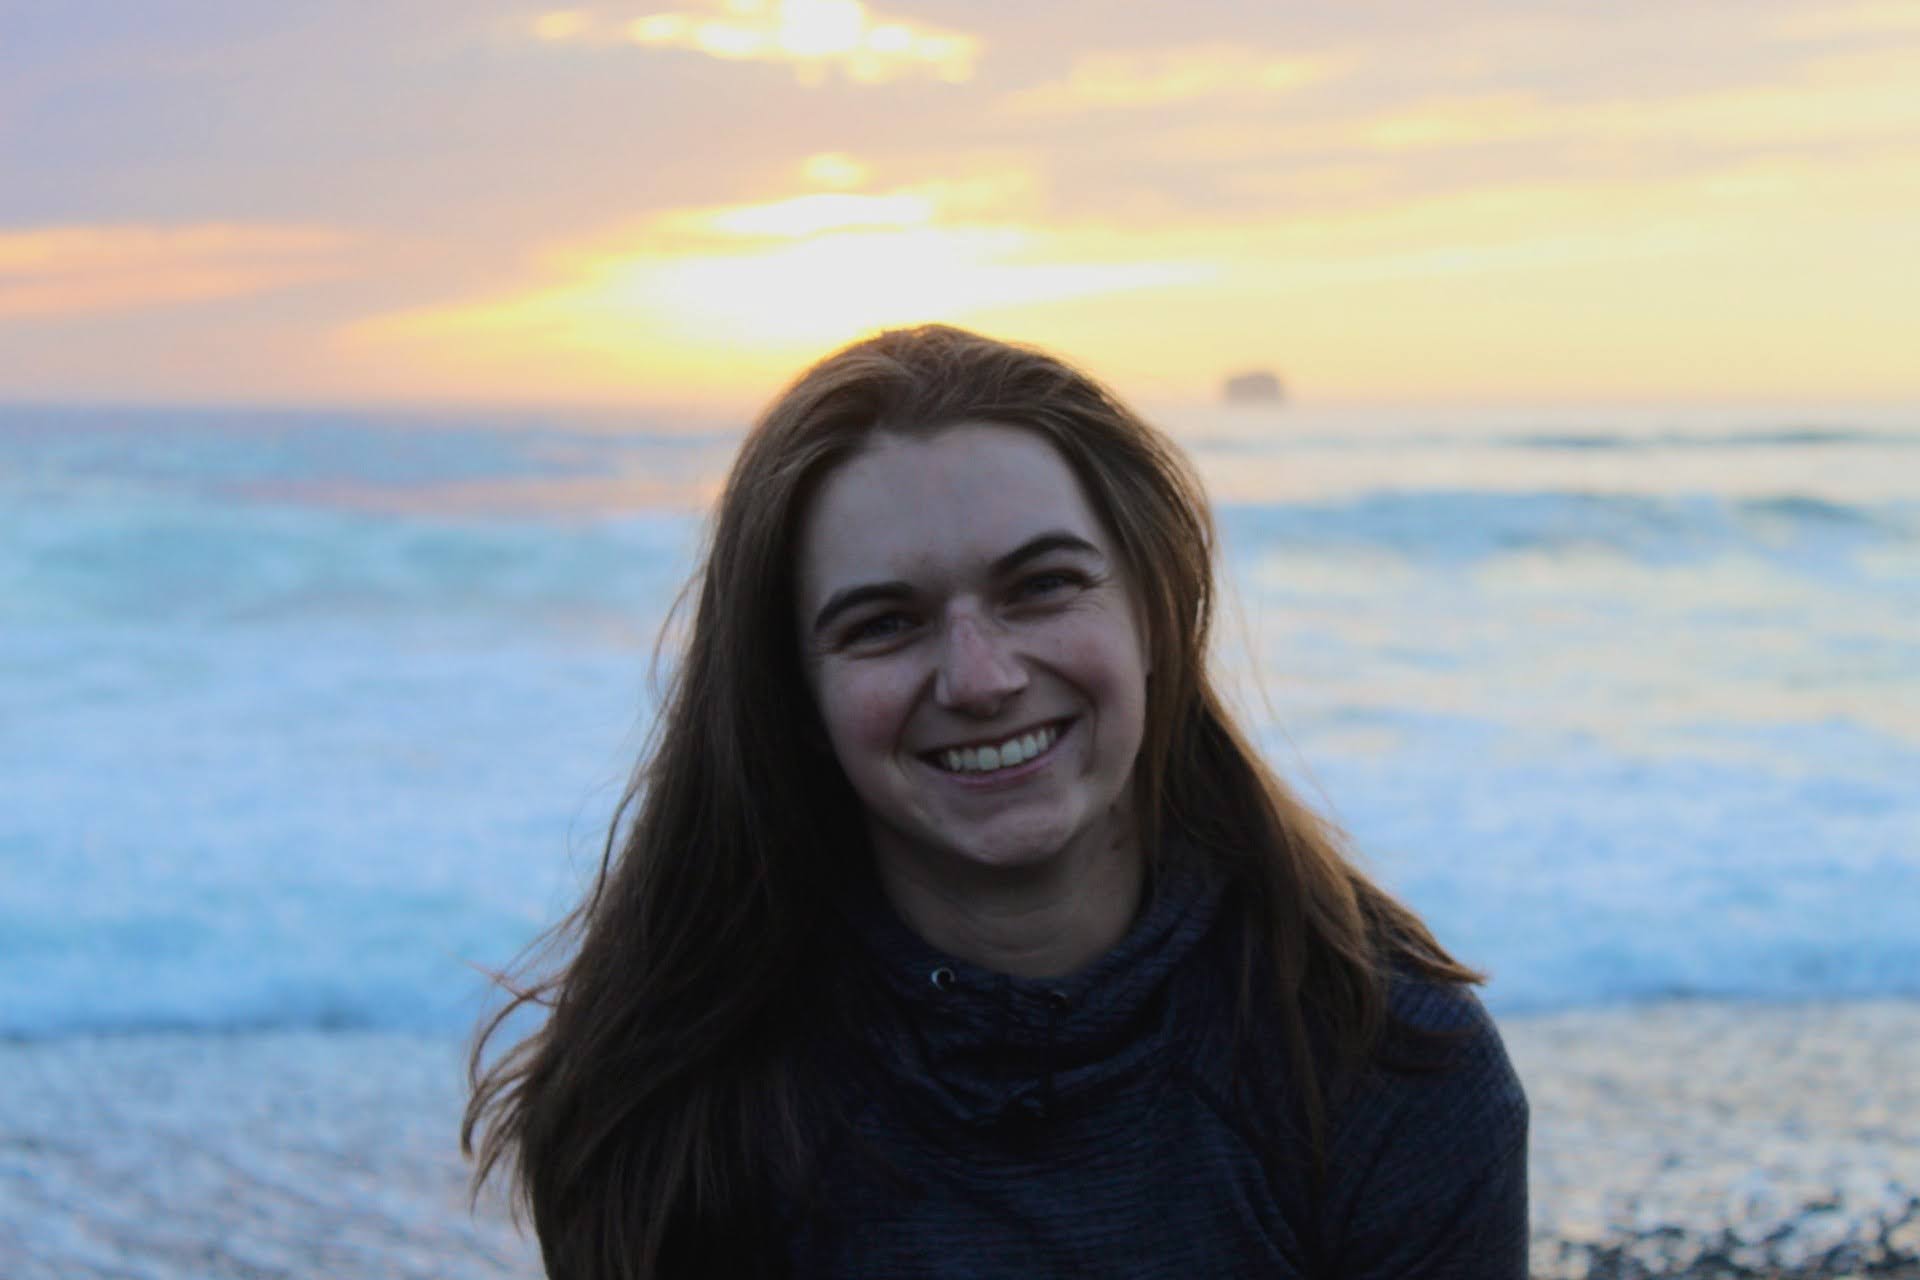 Sarah Quinn smiles in front of a sunset on a beach.